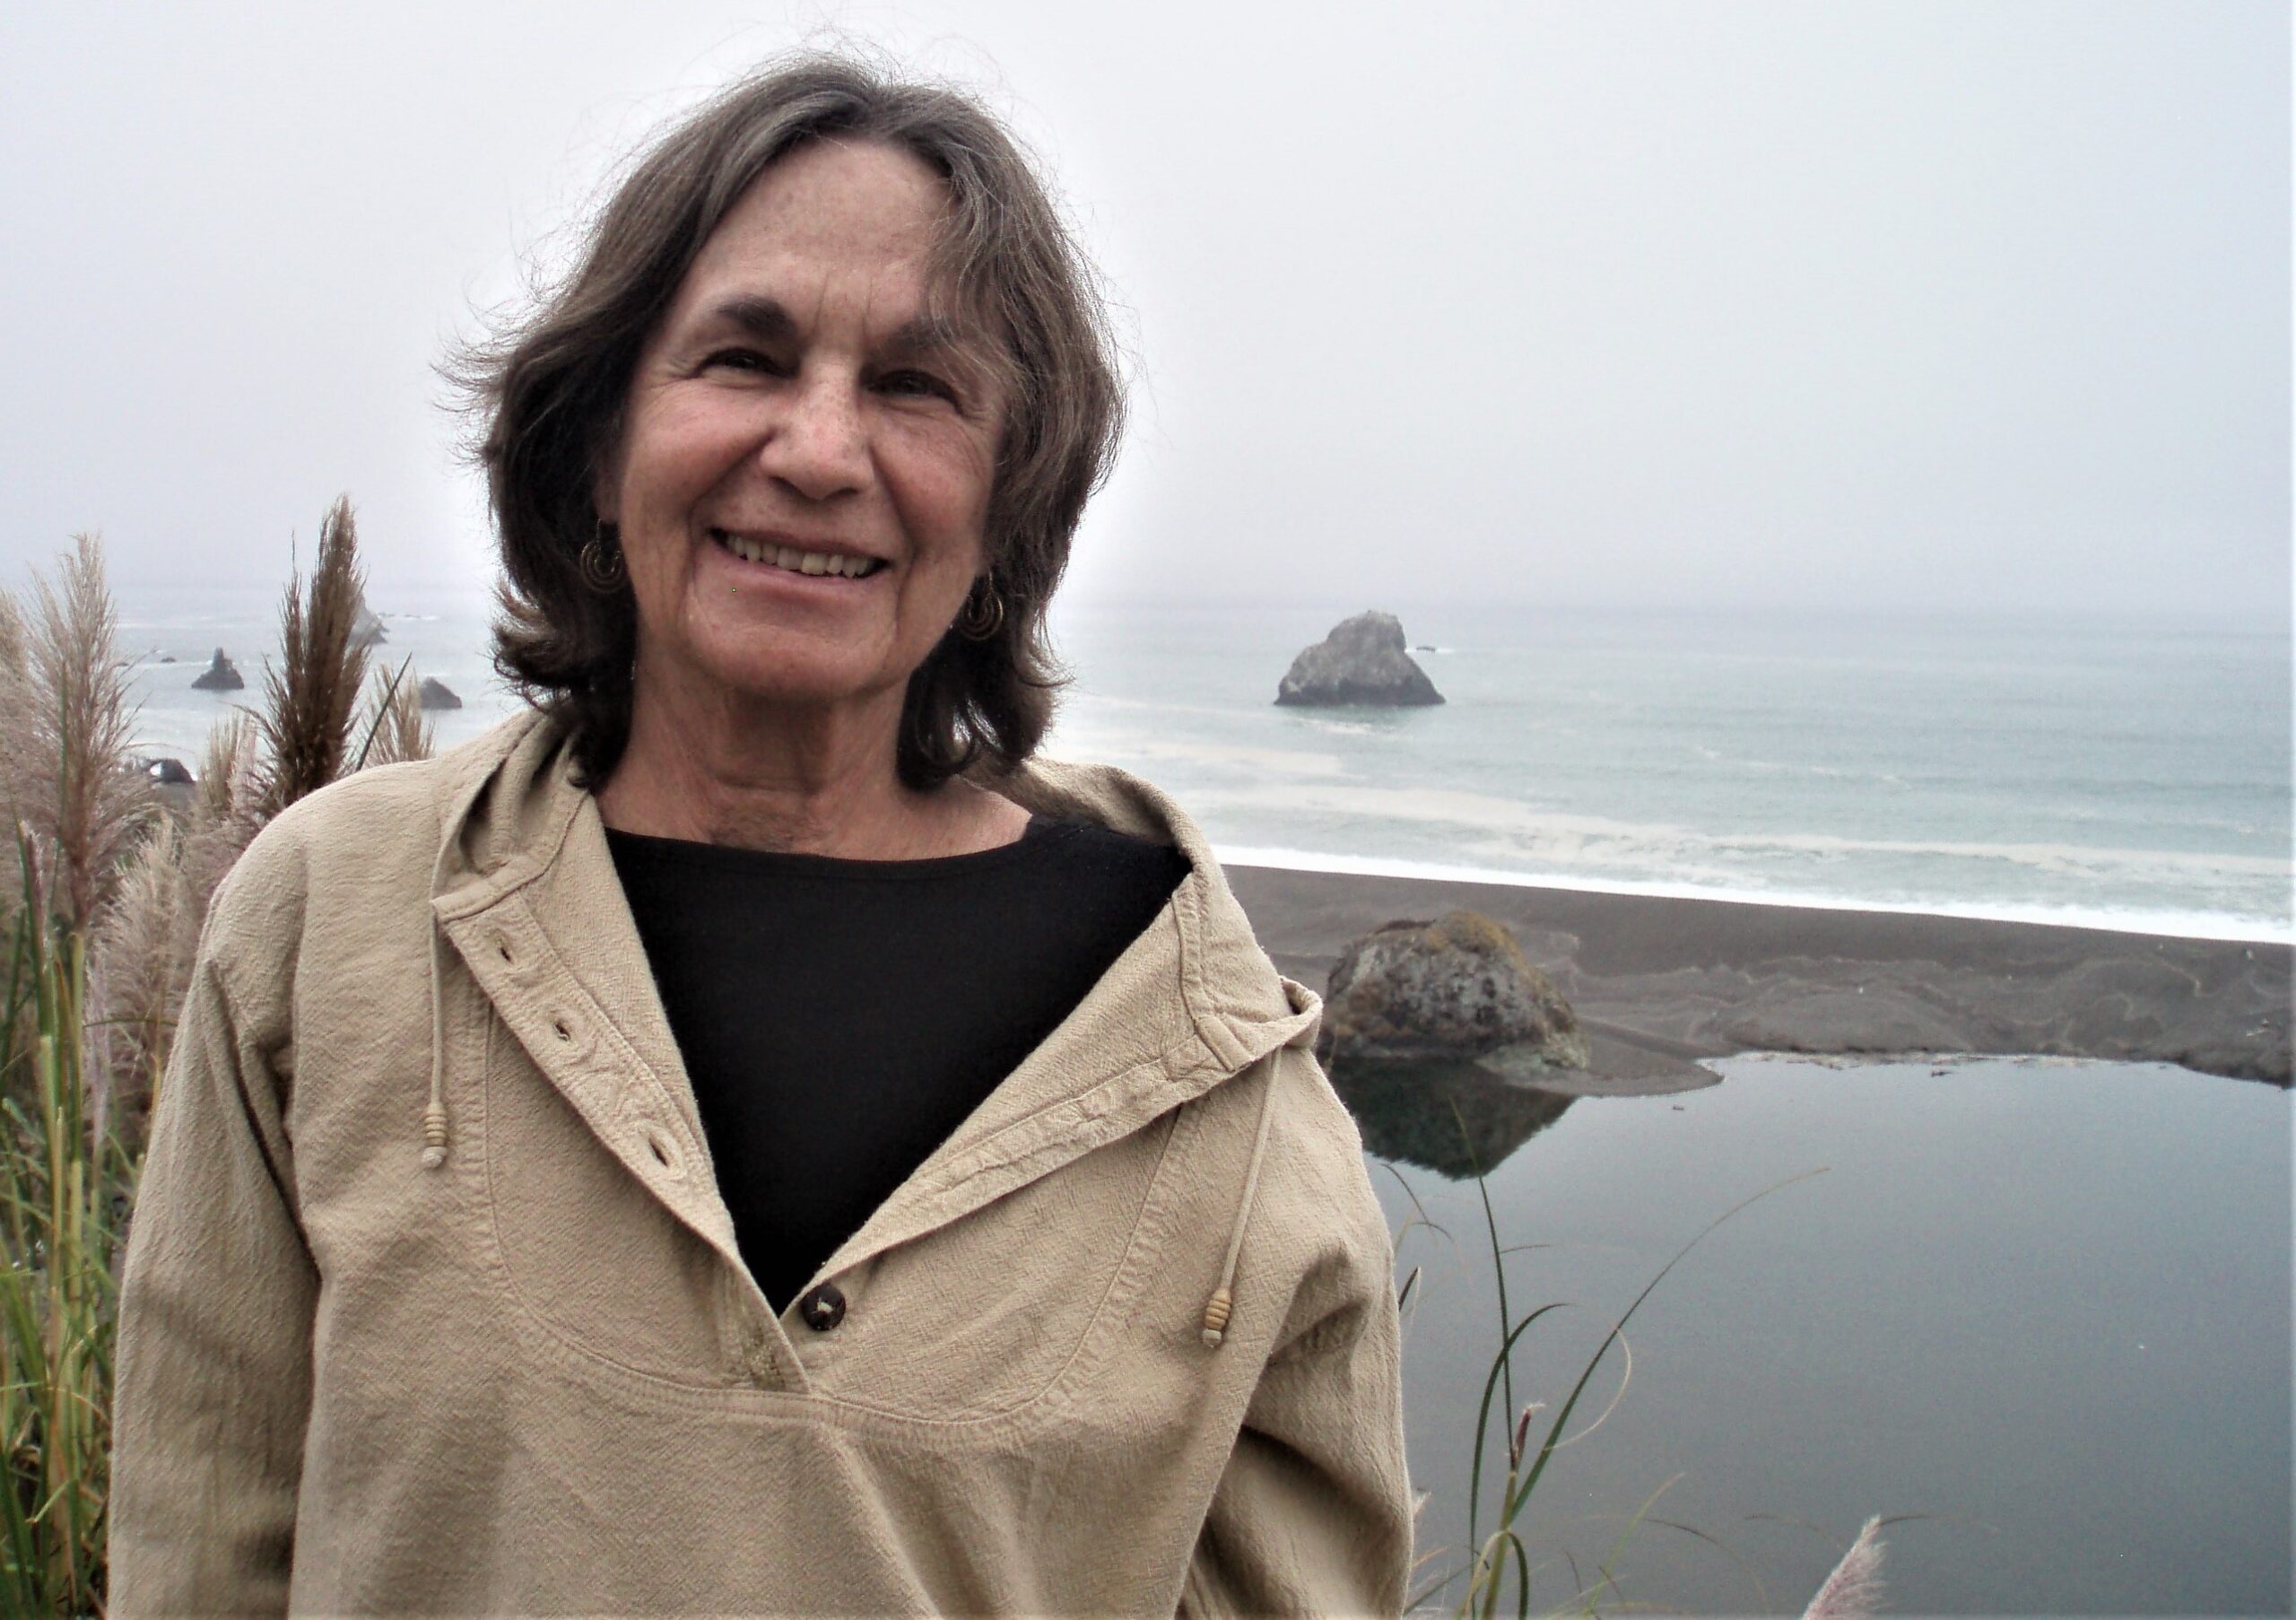 Author and poet Judith Cohen on the shore.